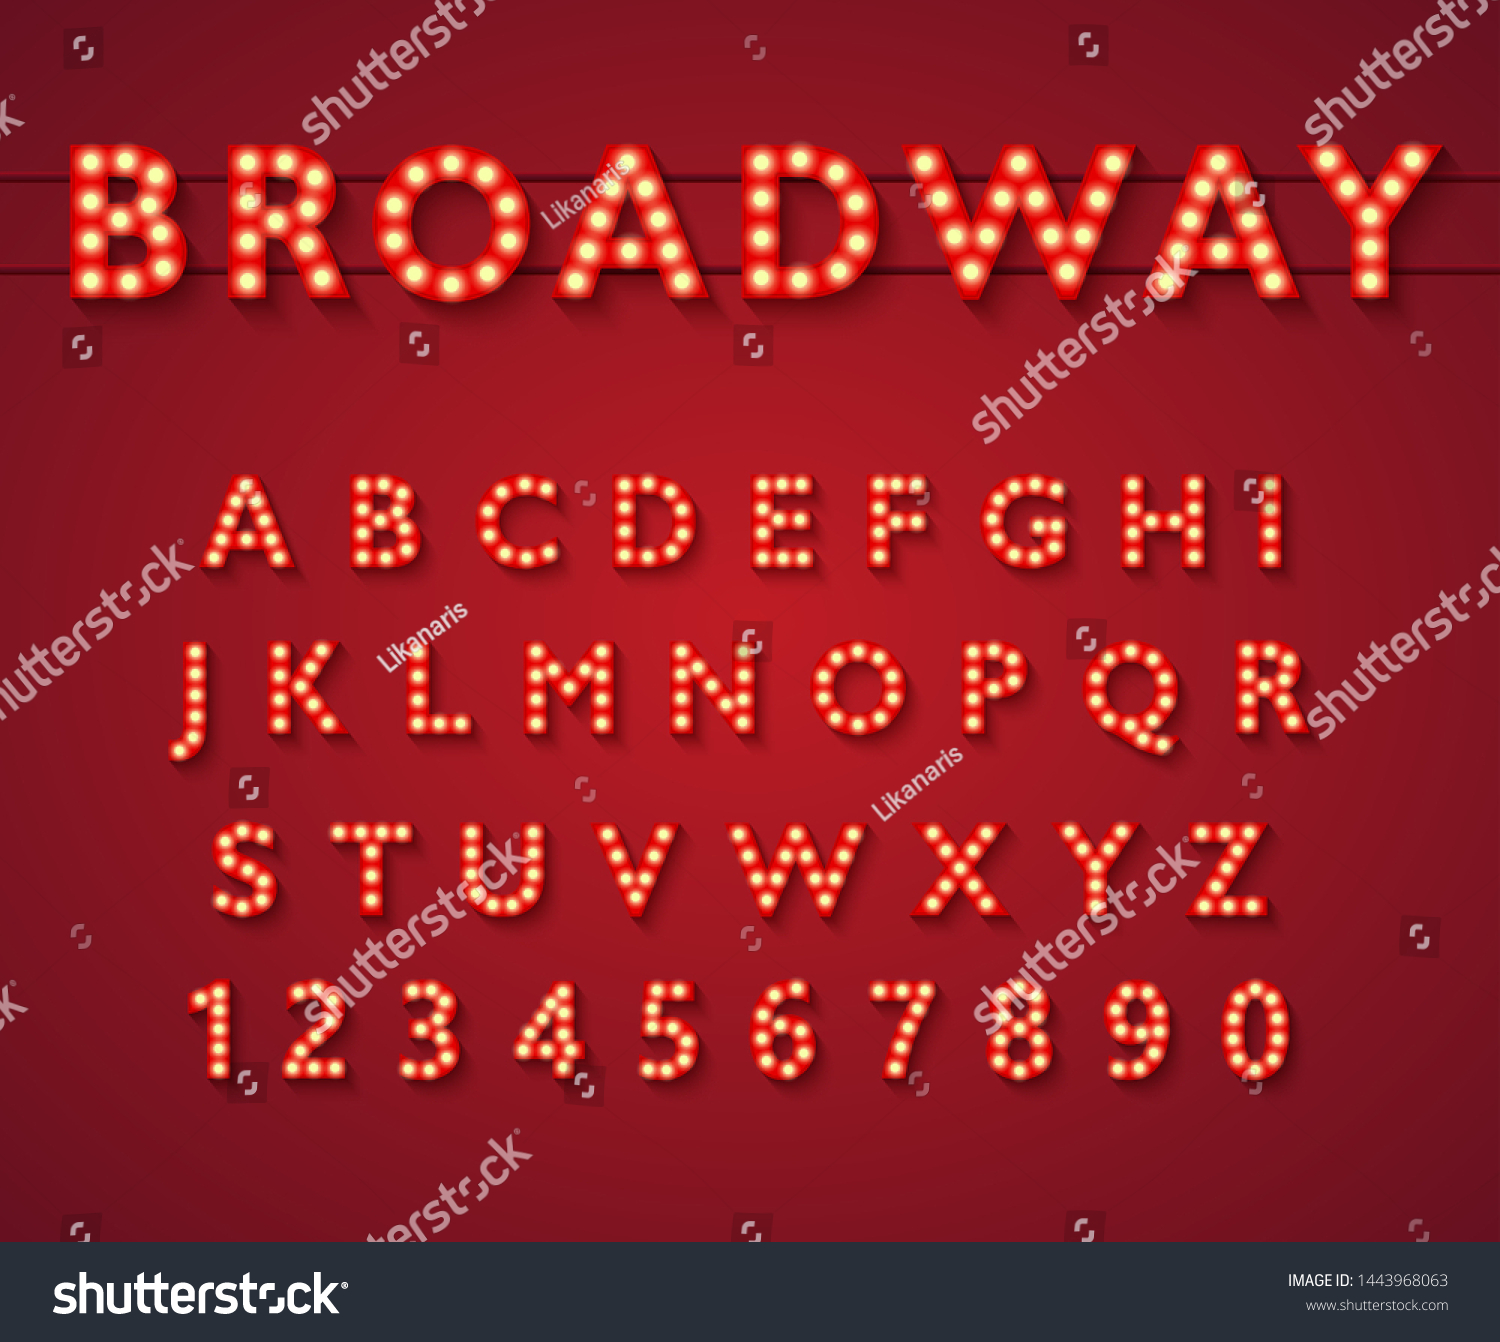 SVG of Light bulb alphabet in Broadway theatre style, vintage glowing bright letters and numbers with yellow lamps and shadows on red background. Typography vector illustration. svg